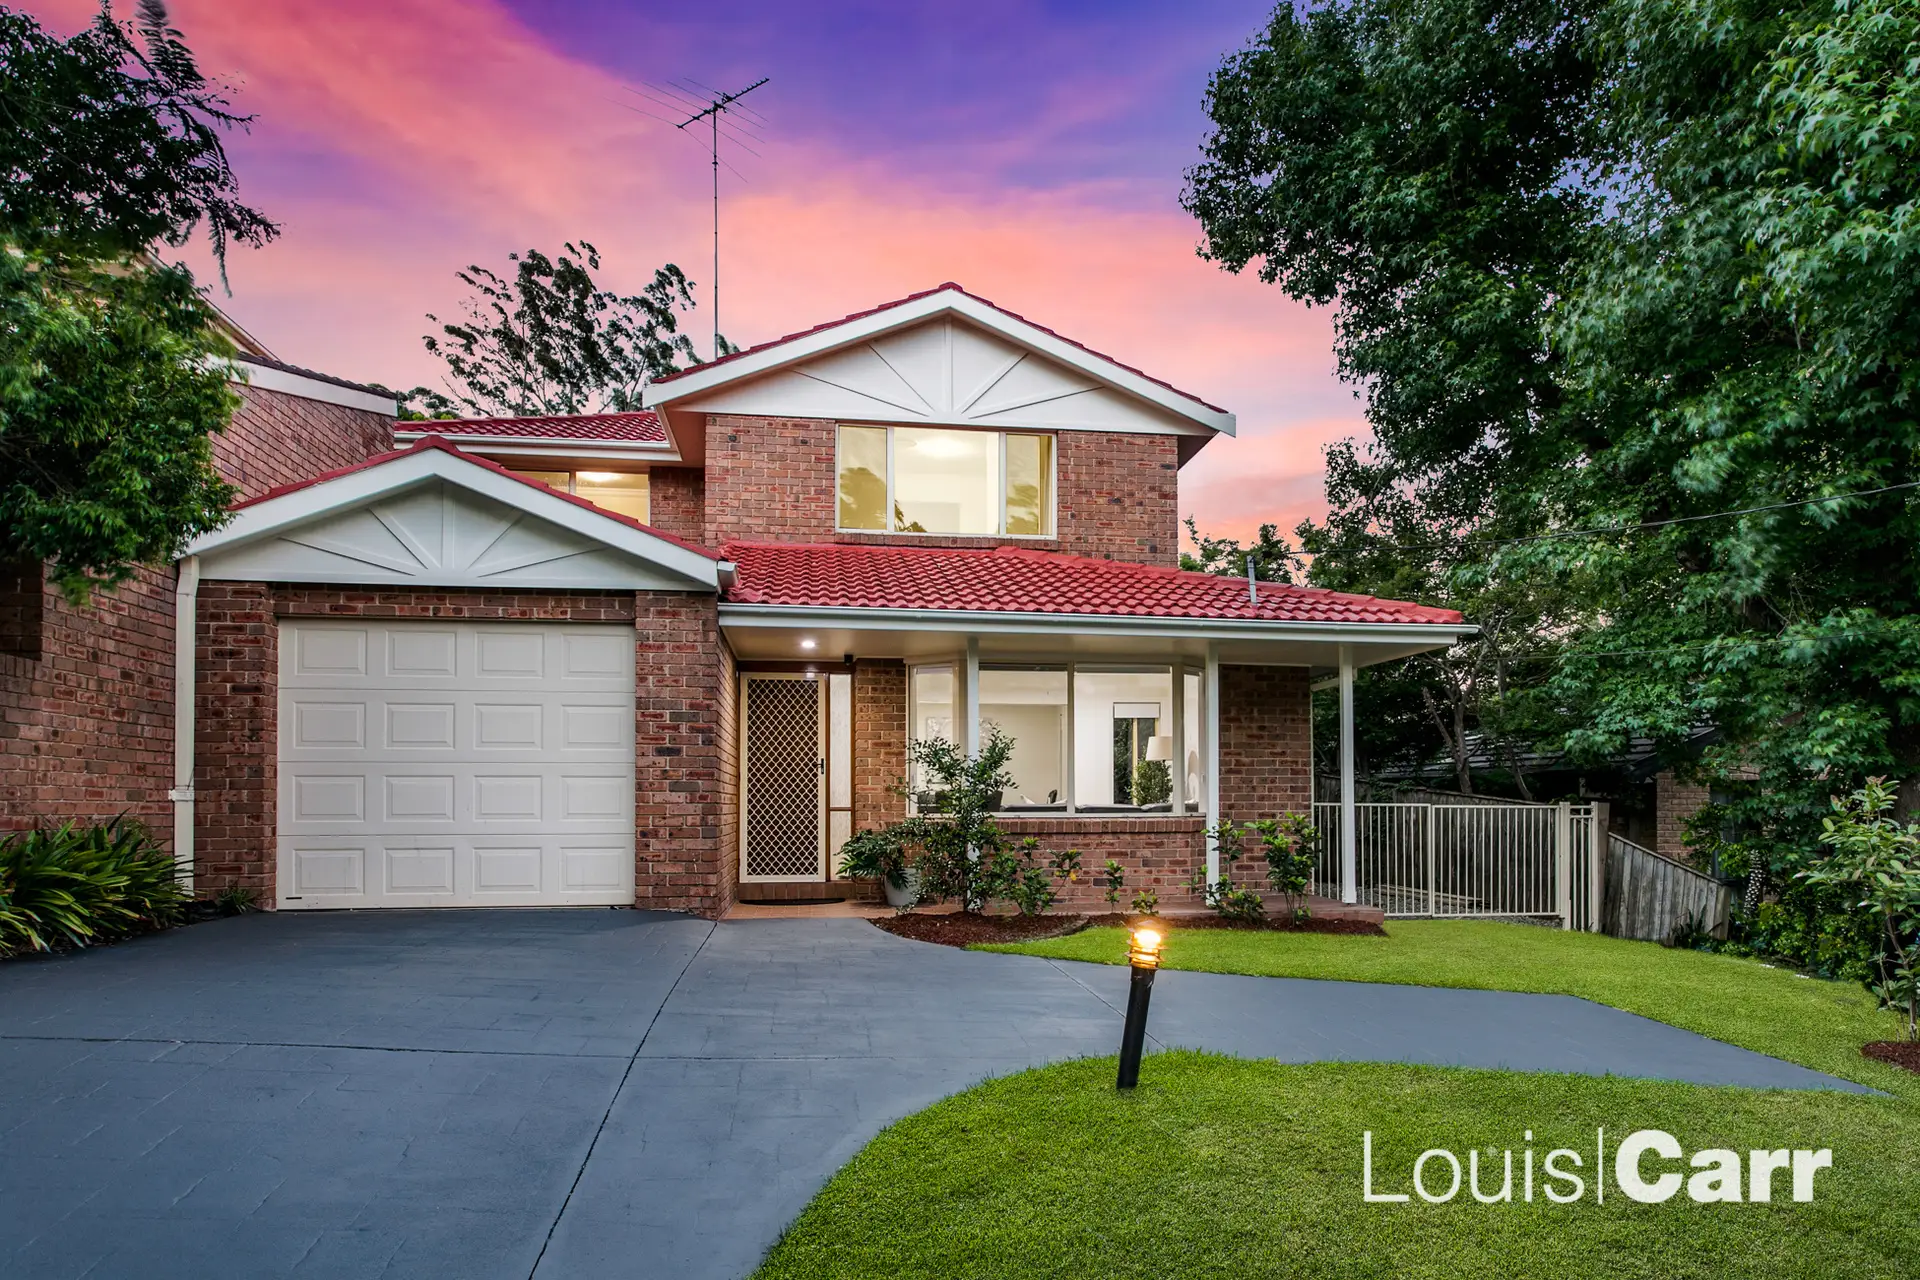 Photo #1: 3B John Savage Crescent, West Pennant Hills - Sold by Louis Carr Real Estate